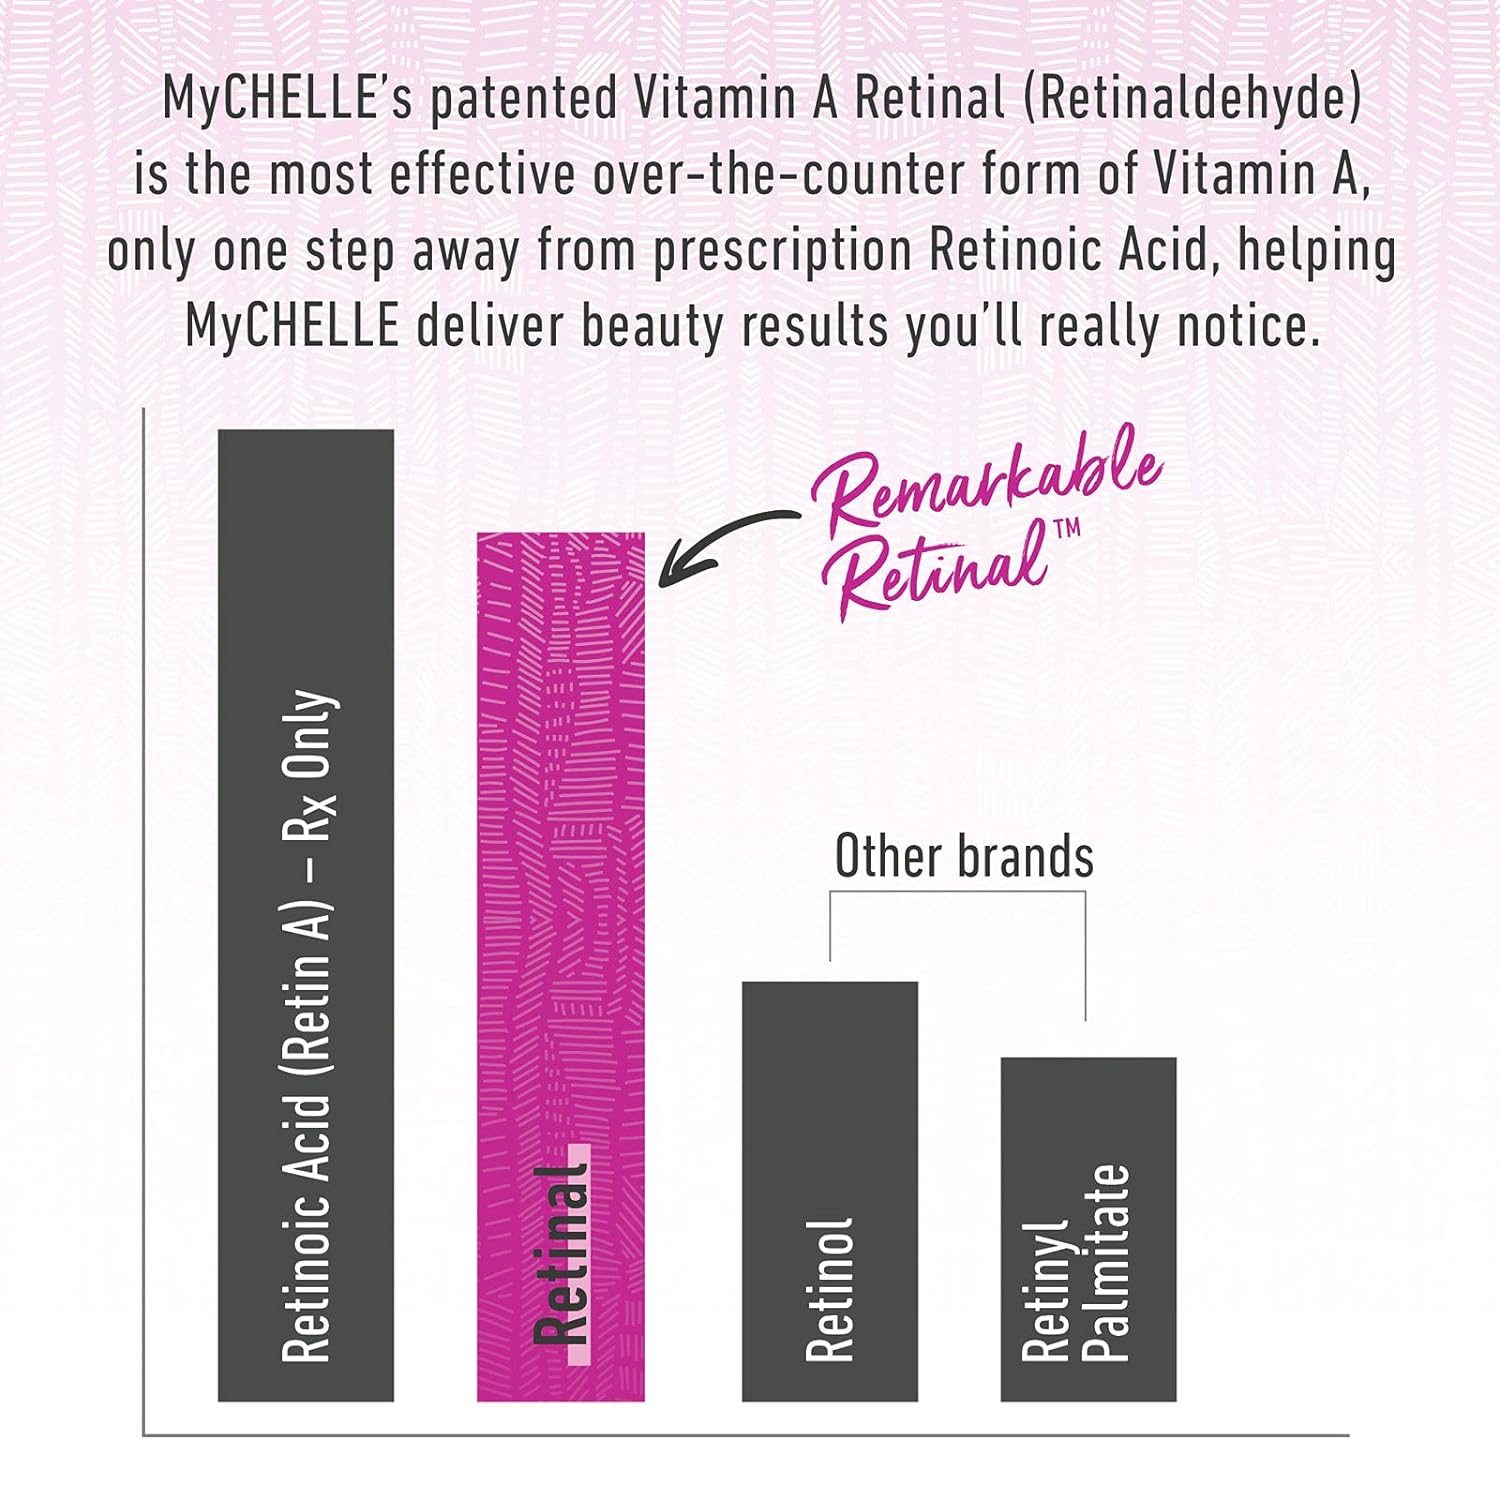 MyCHELLE Dermaceuticals Remarkable Retinal Facial Cleanser (4.2 Fl Oz), Renews and Refines Skin with Vitamin A Retinaldehyde and Orange Plant Stem Cells : Beauty & Personal Care